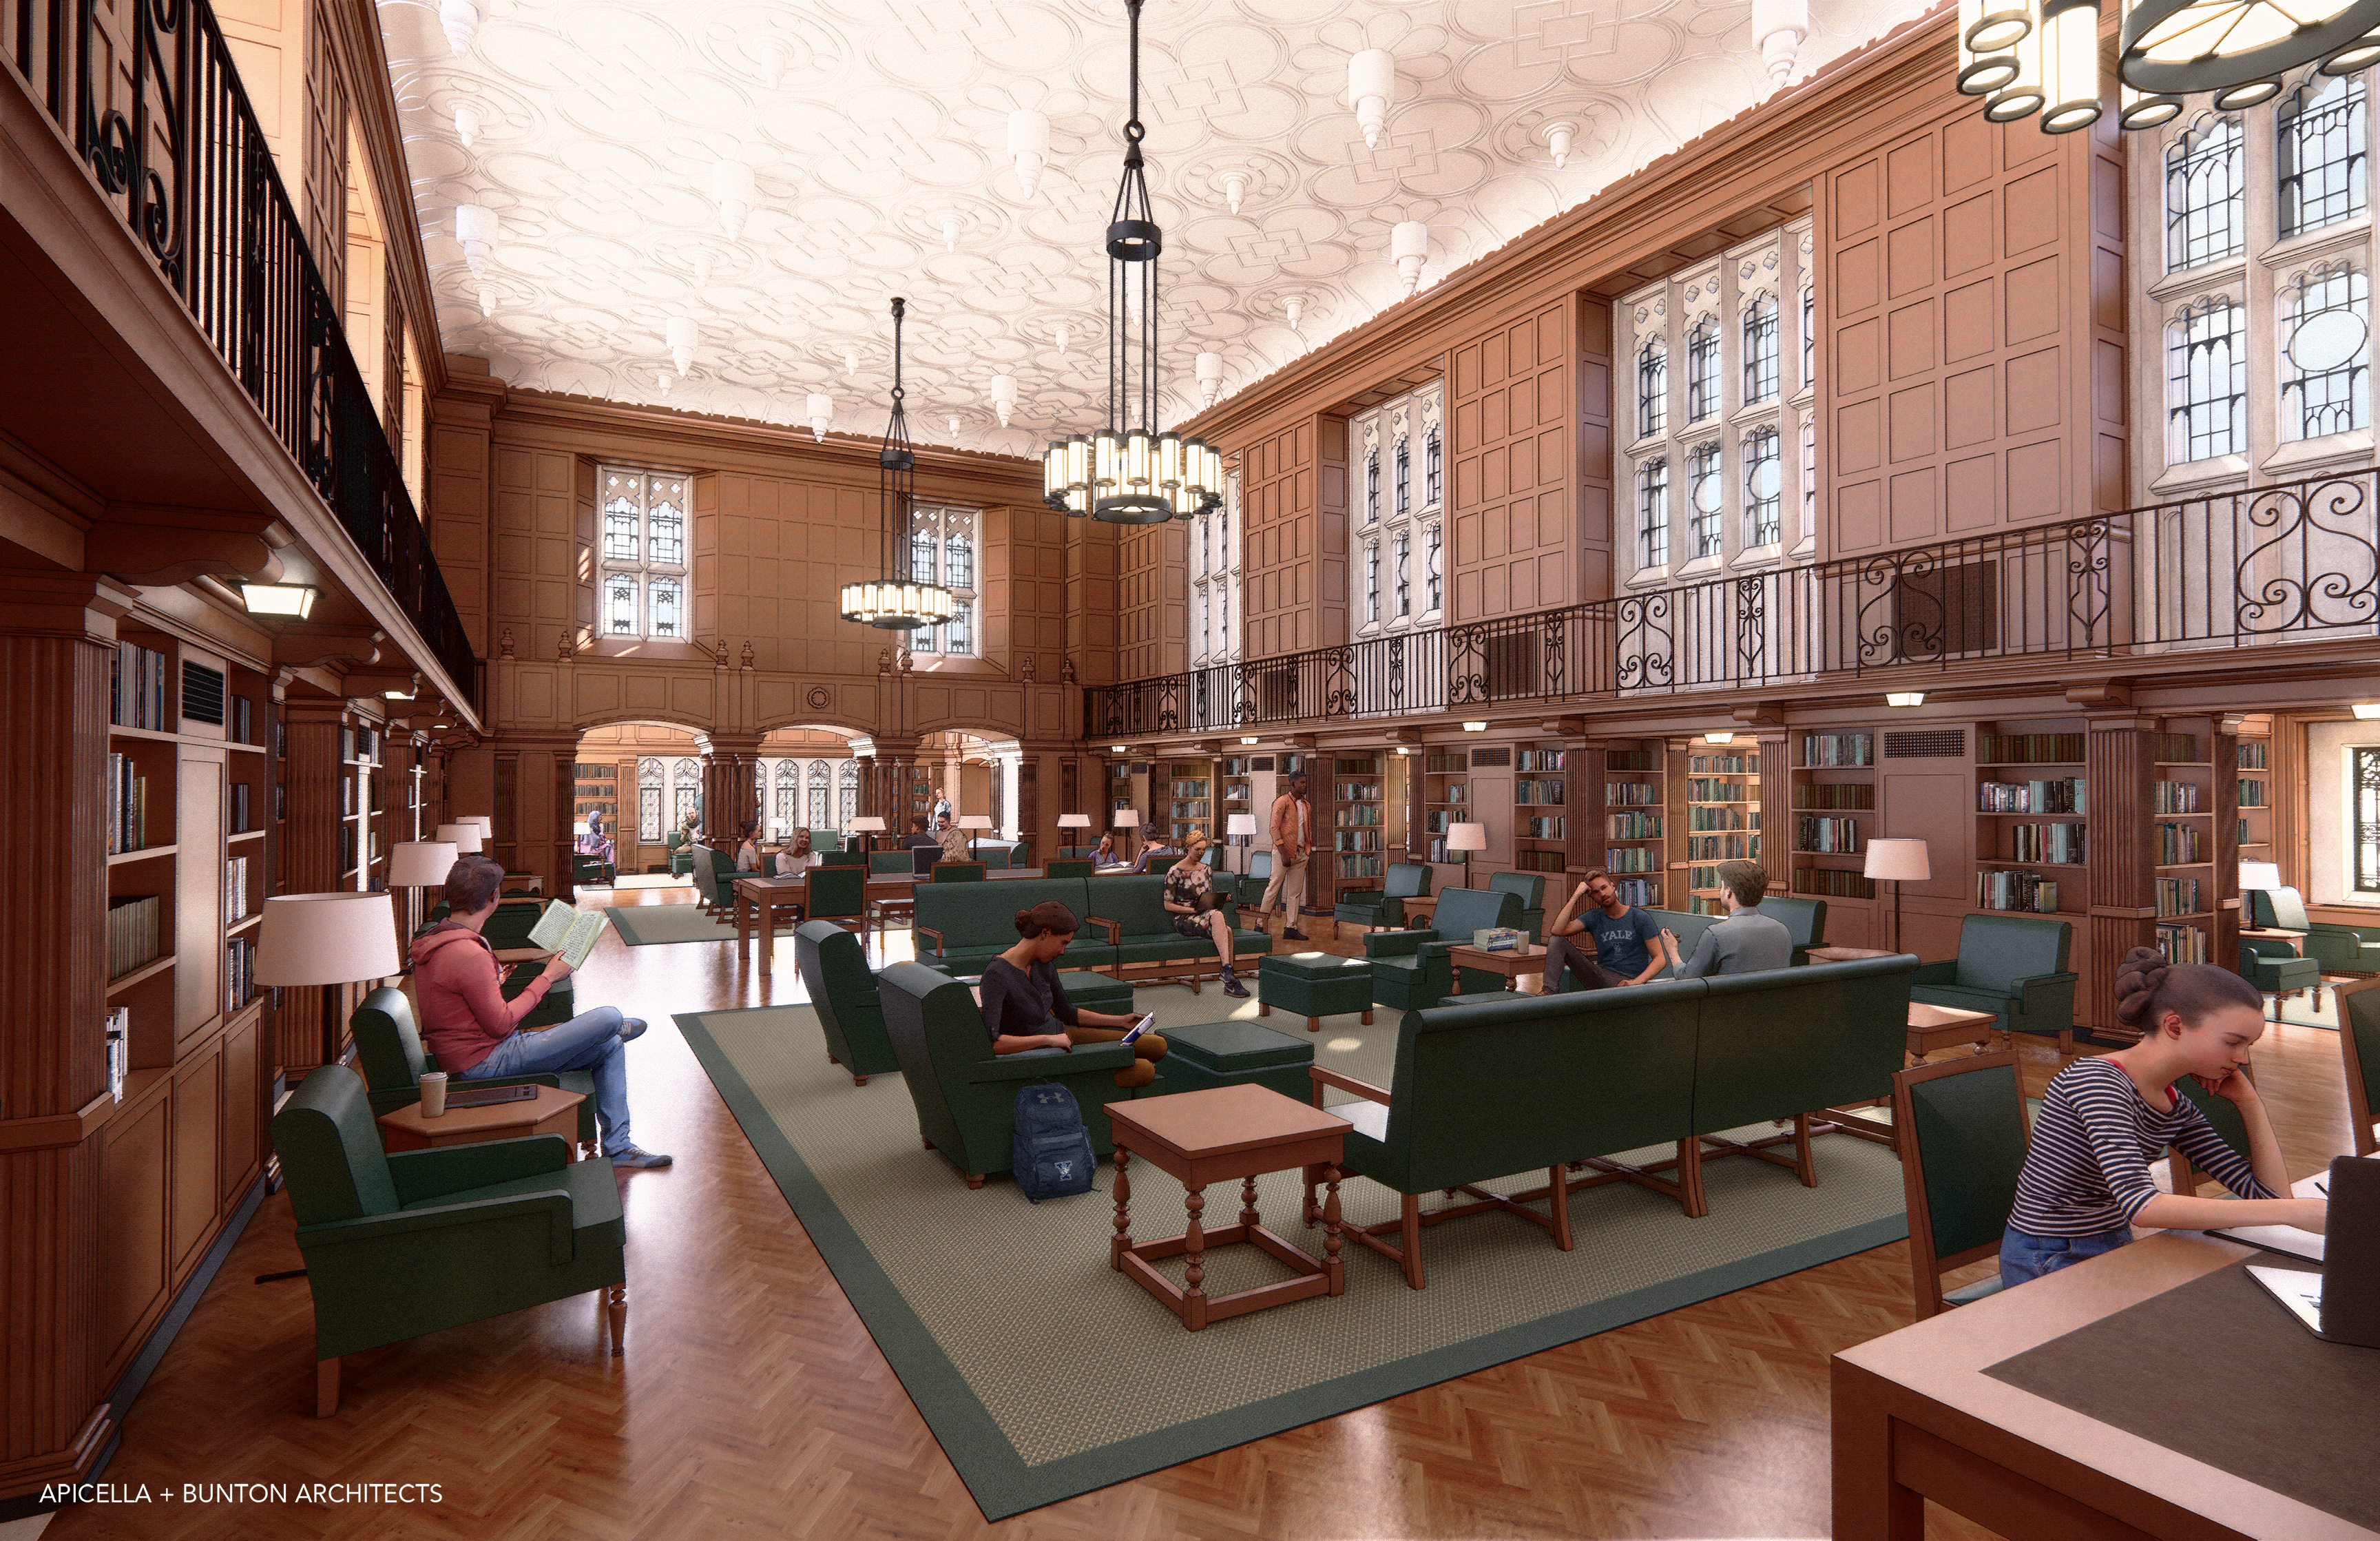 Architect's illustration of a large booklined reading room with upholstered couches, chandeliers, and Gothic style windows.